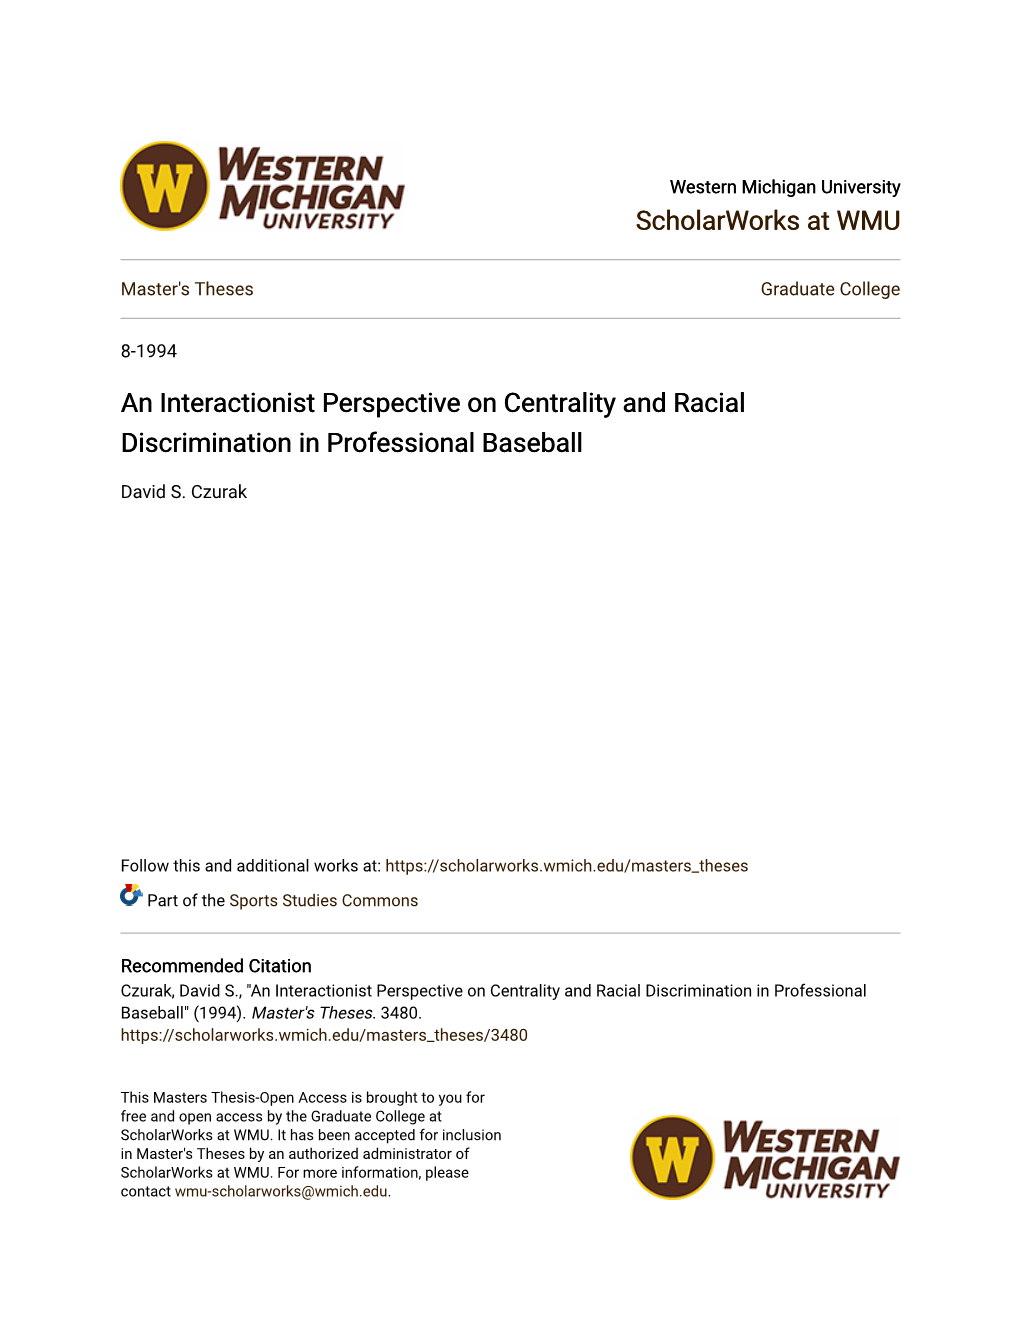 An Interactionist Perspective on Centrality and Racial Discrimination in Professional Baseball